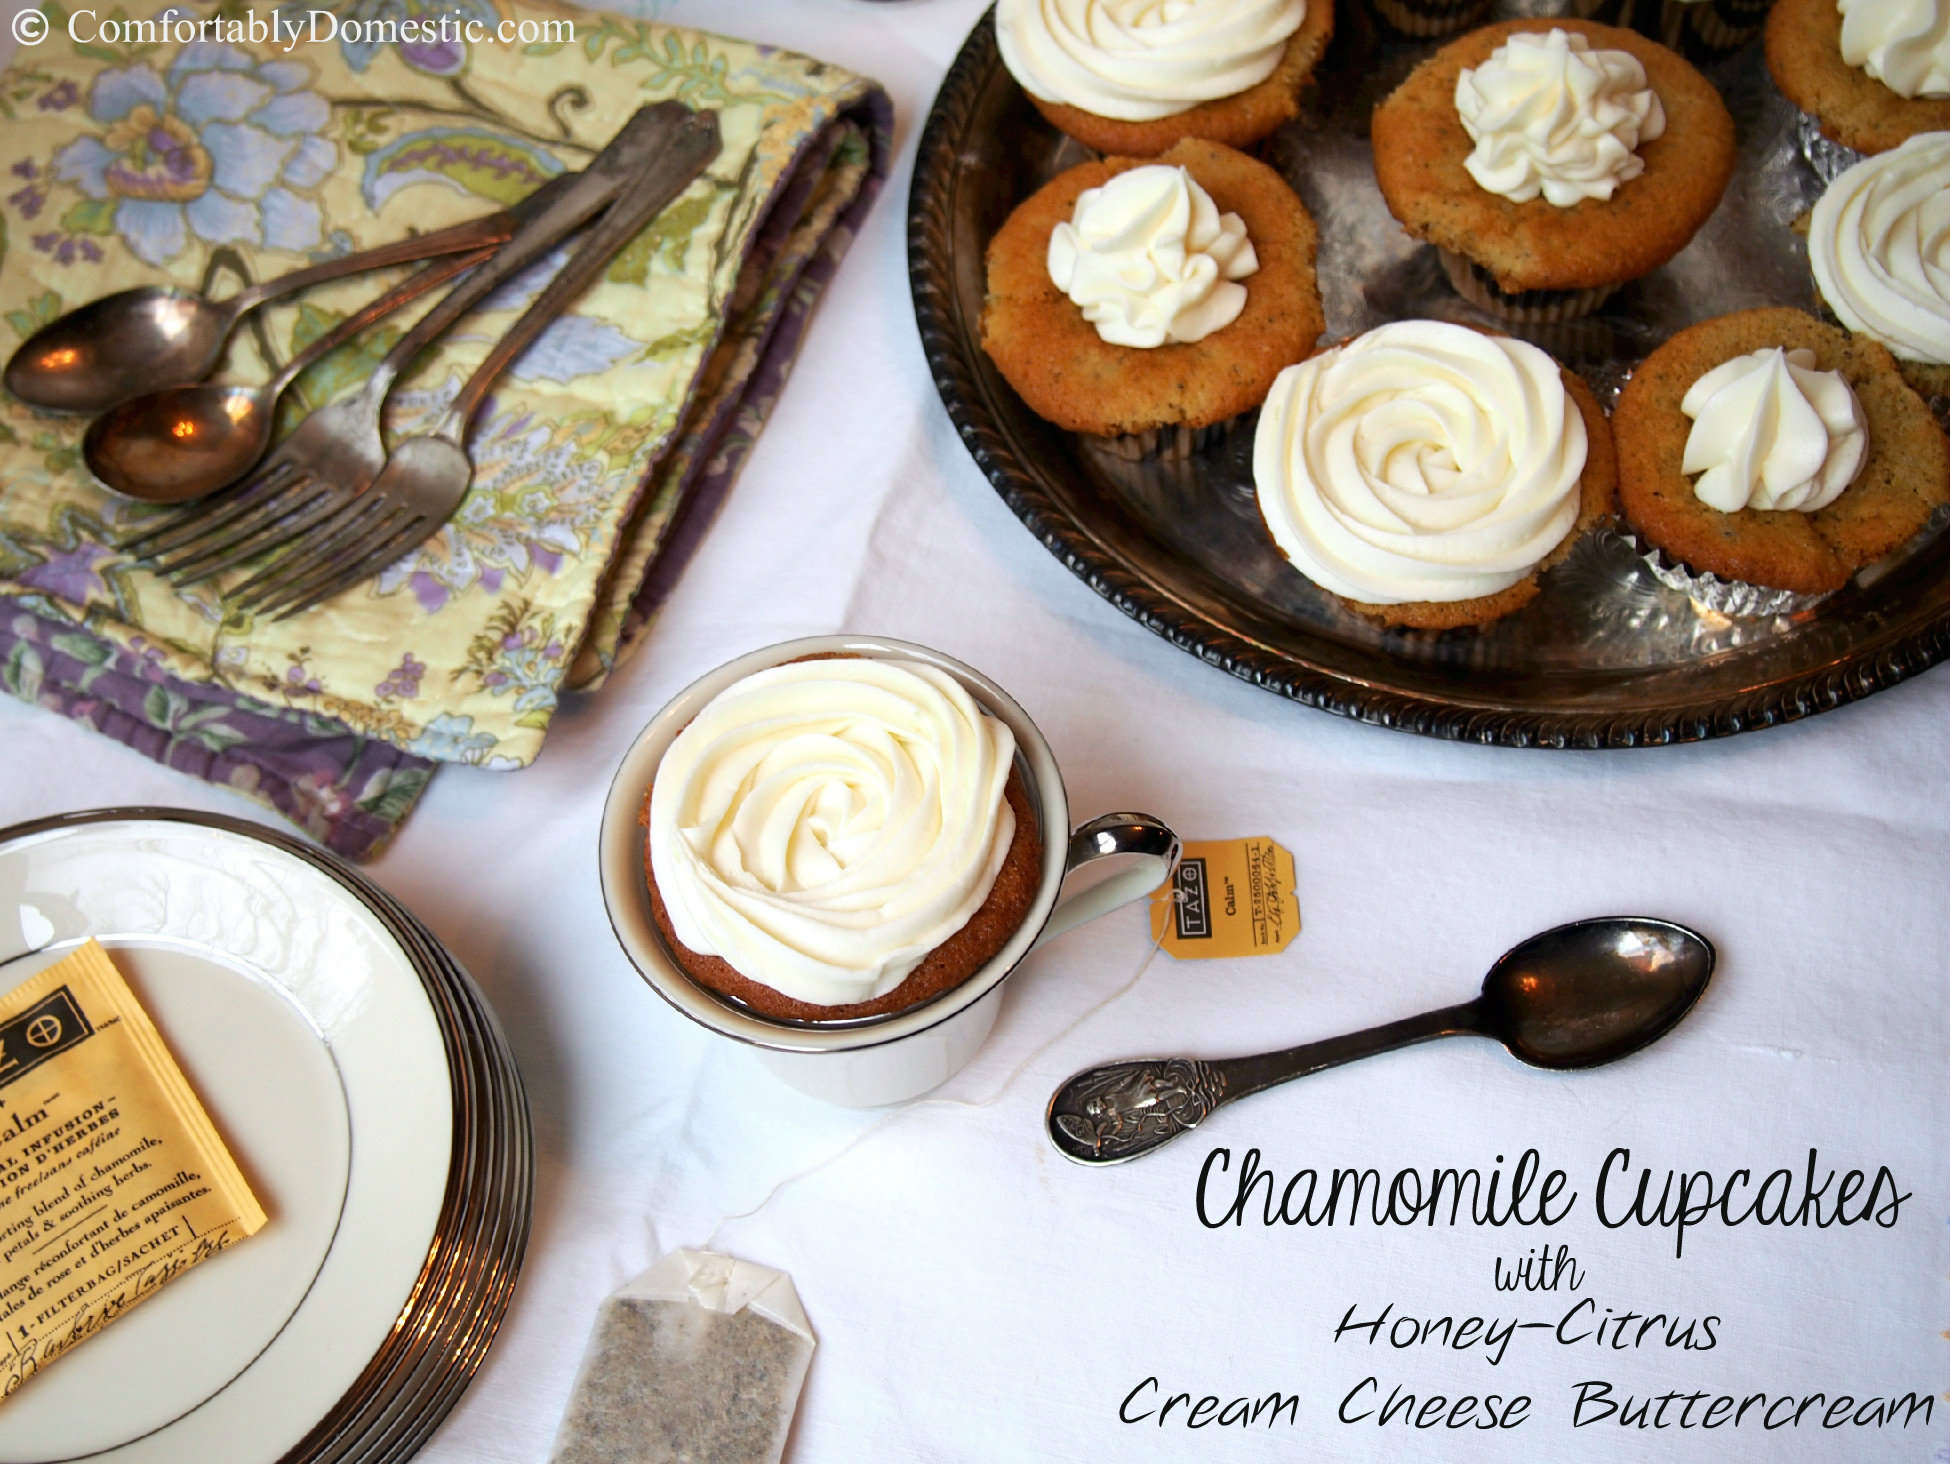 Chamomile Cupcakes with Honey-Citrus Cream Cheese Buttercream Frosting | ComfortablyDomestic.com